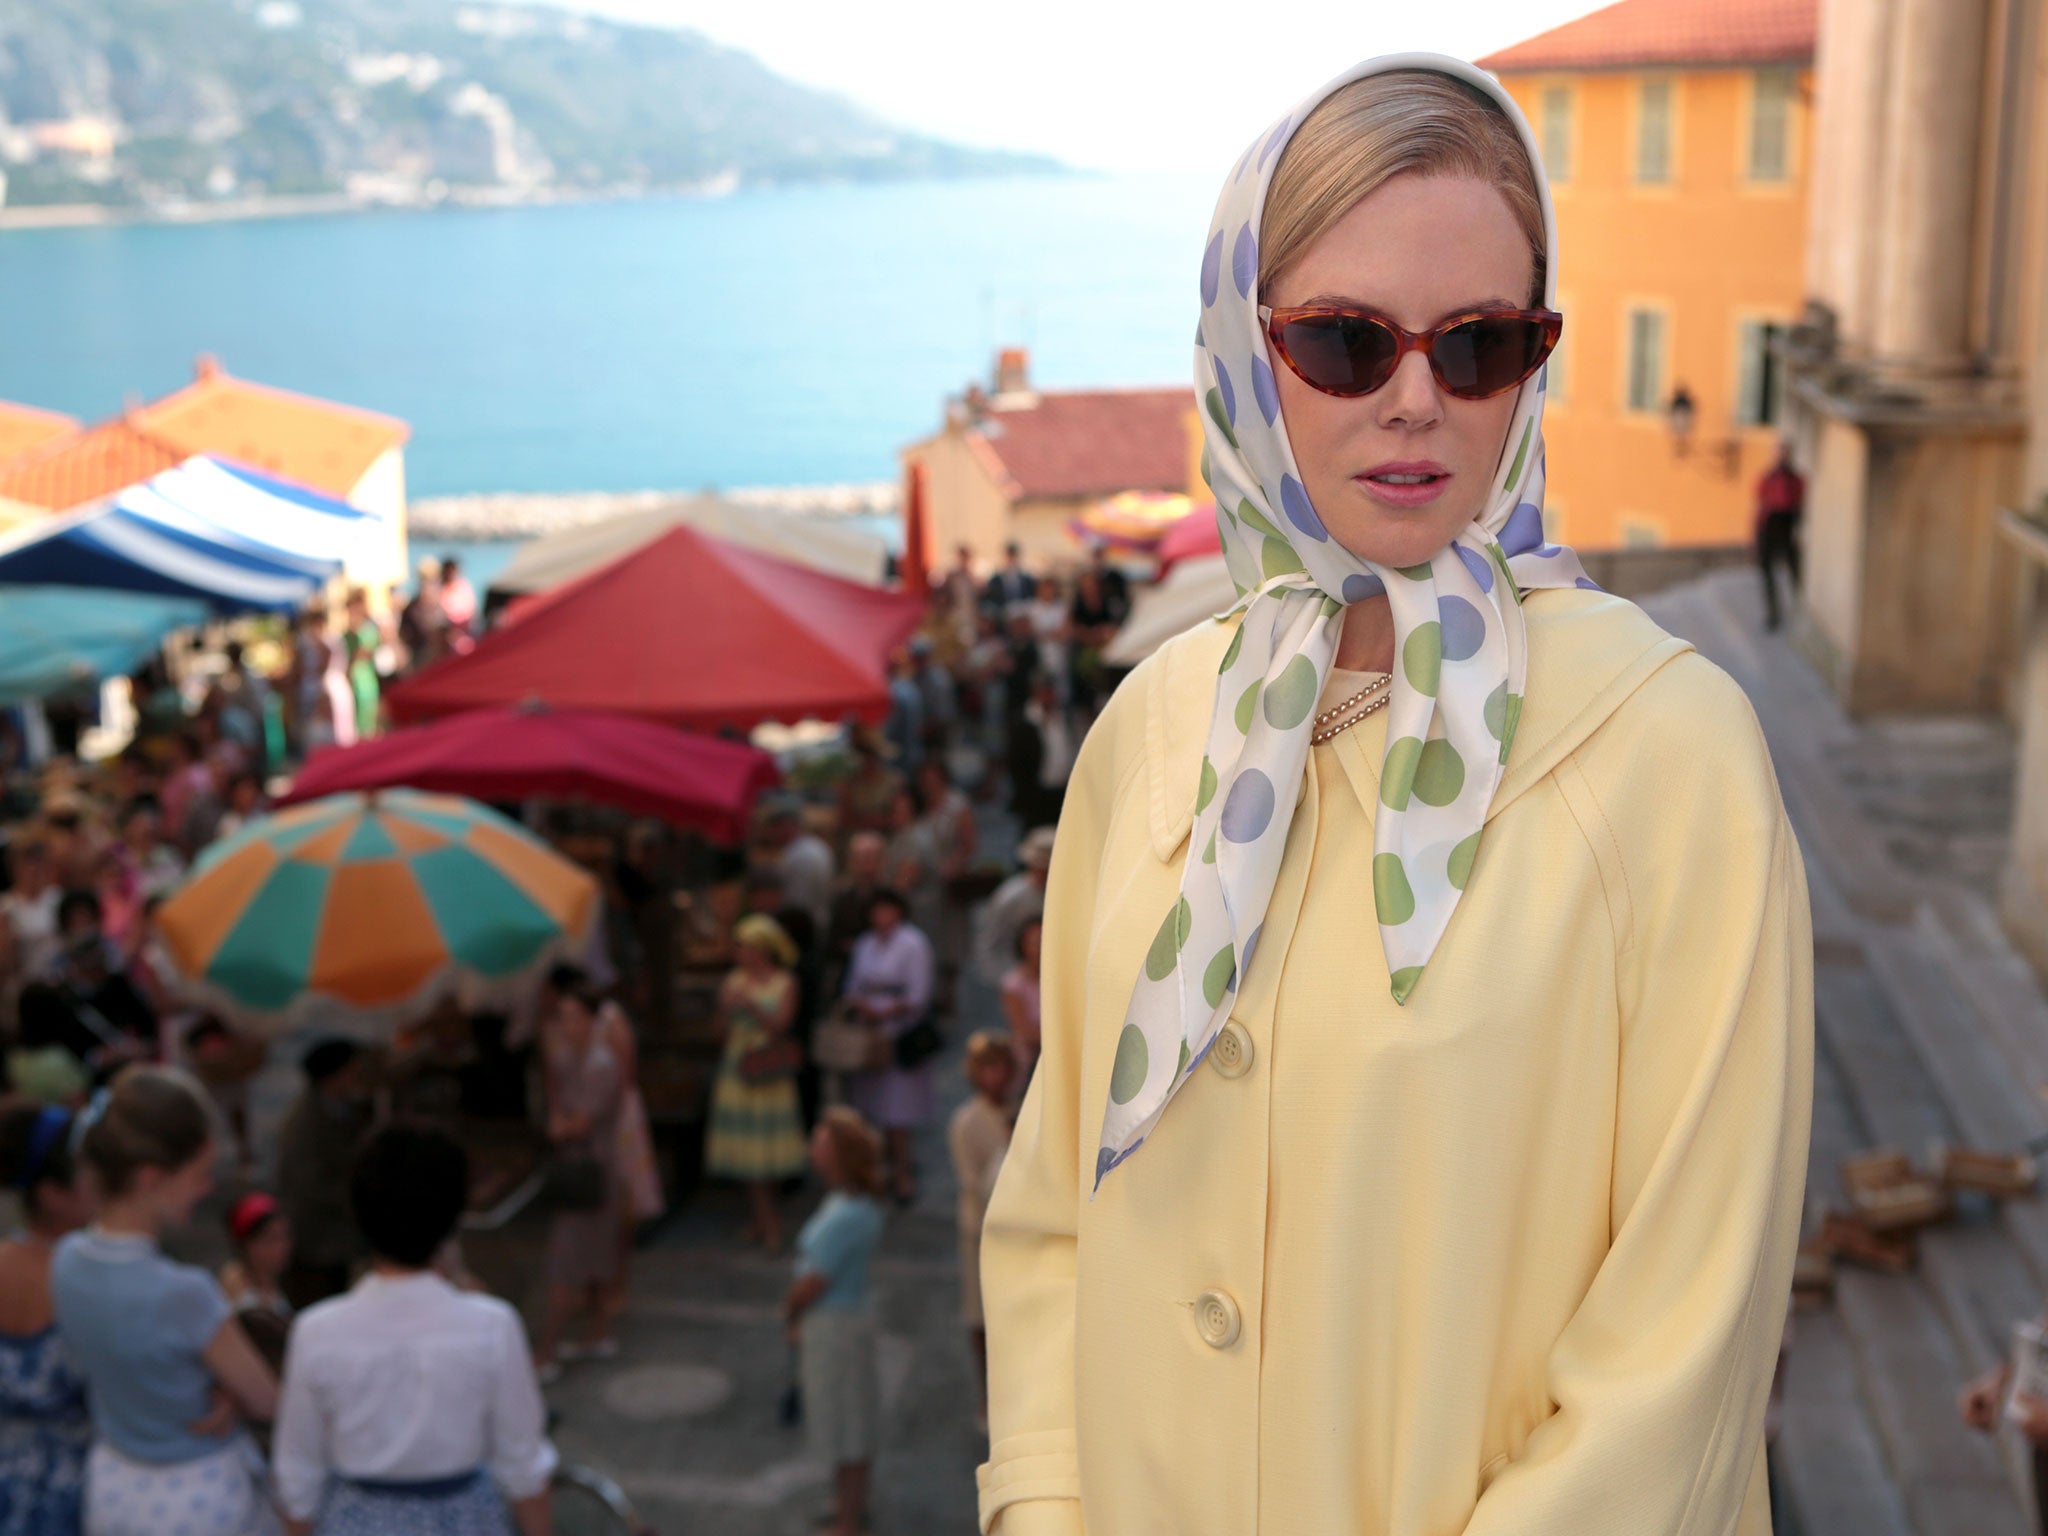 Nicole Kidman plays Grace Kelly in the film, which was criticised by Monaco’s royal family